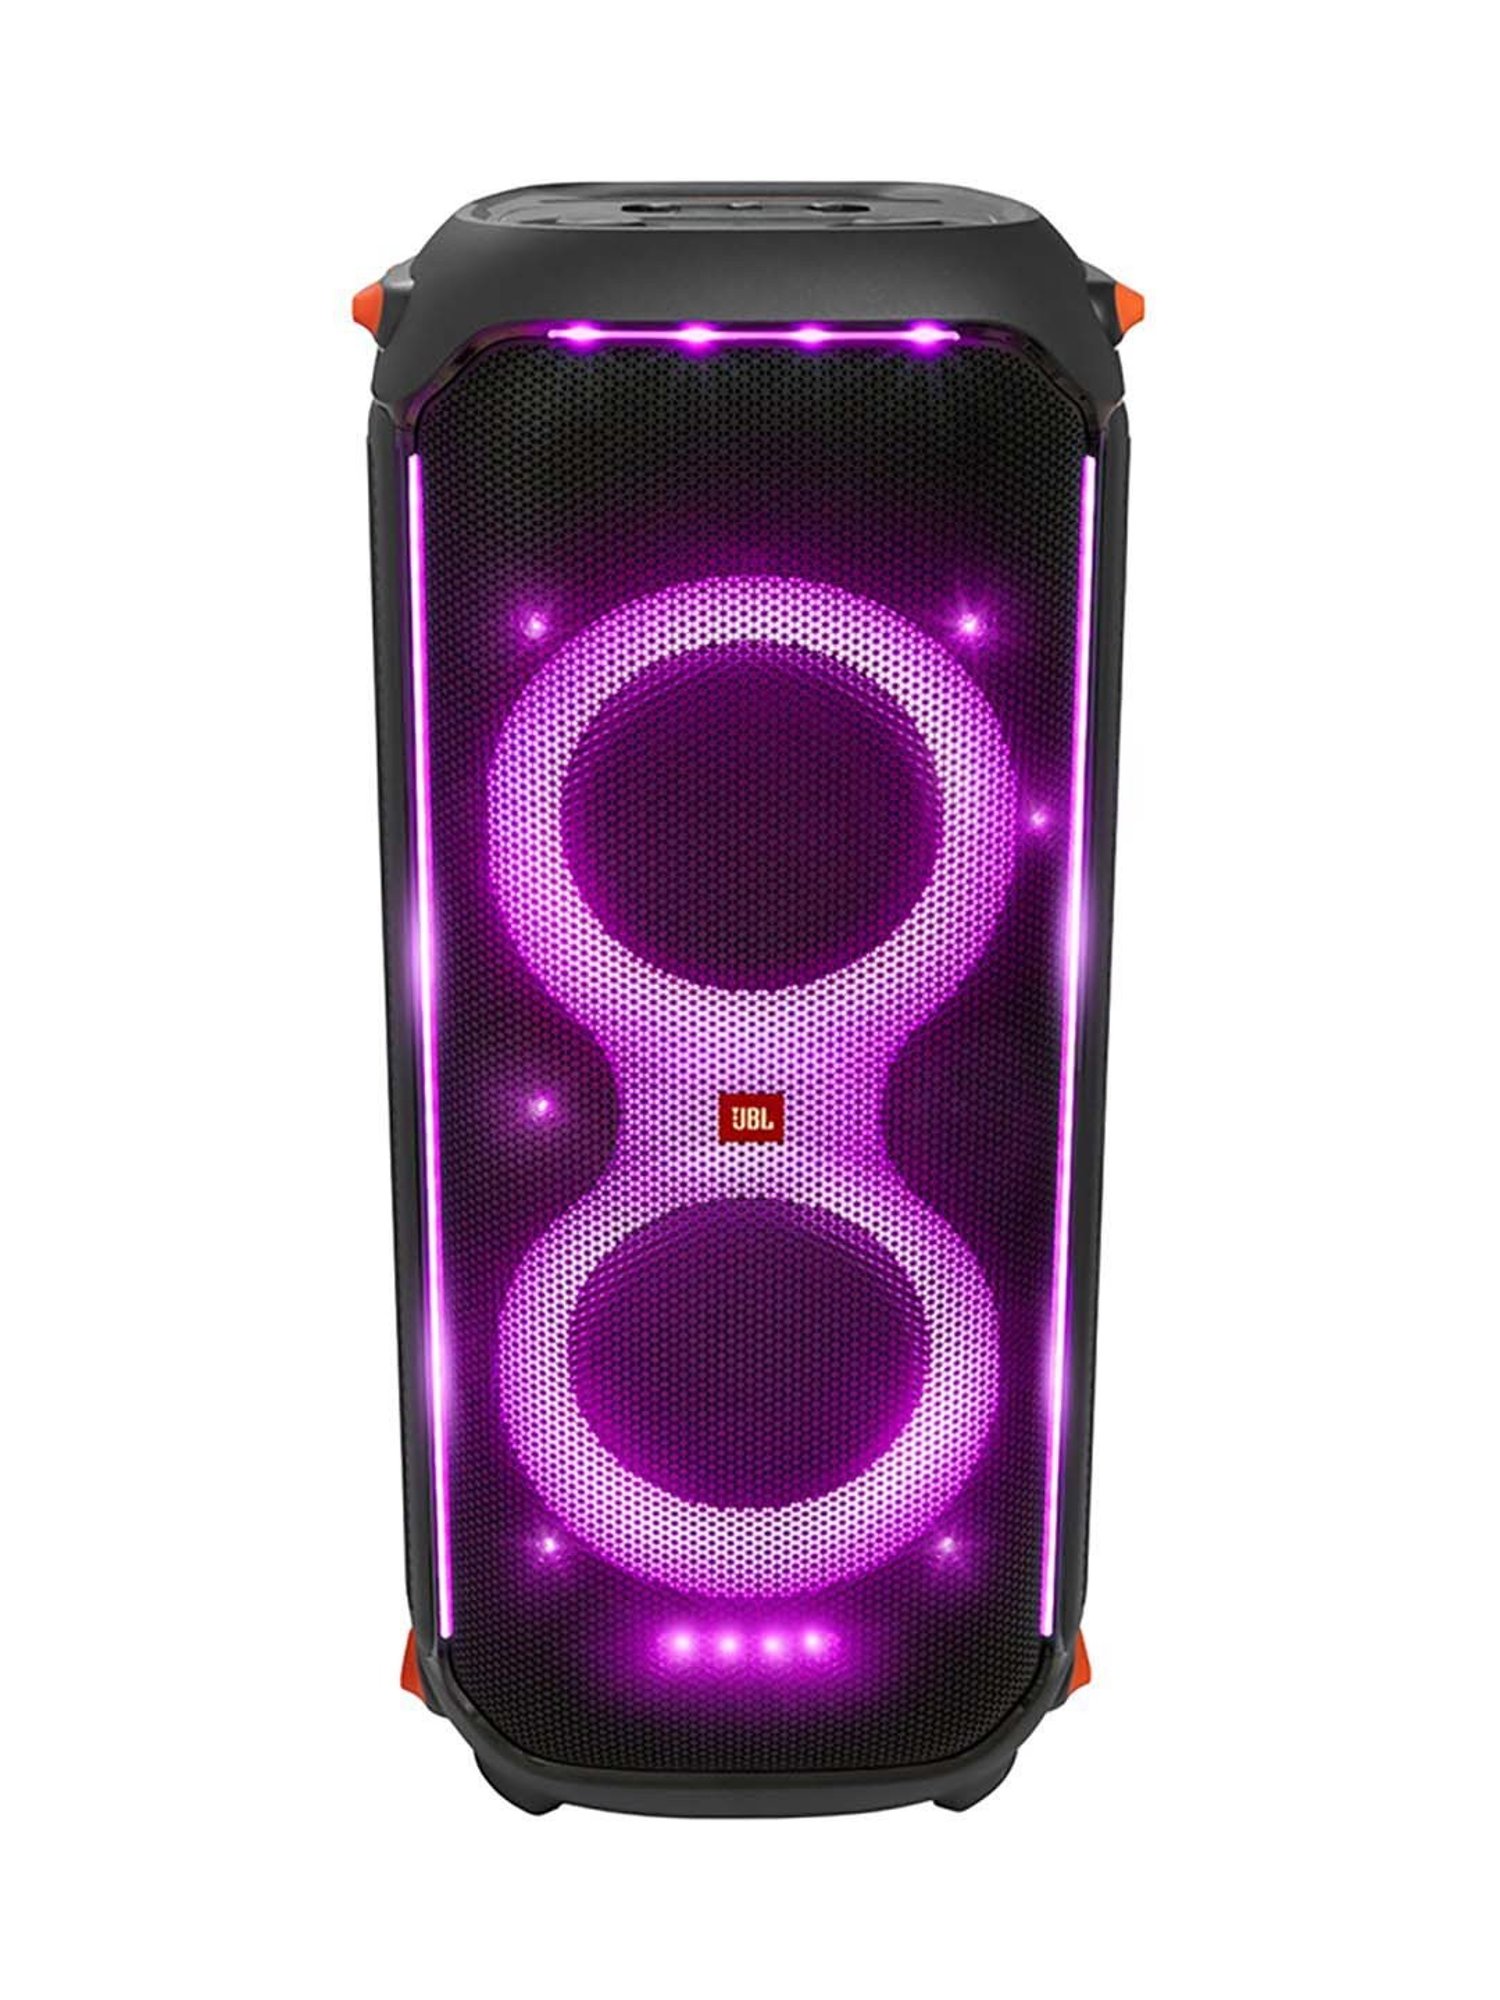 Buy JBL Partybox 710 Portable Bluetooth Party Speaker Online in India at  Lowest Price